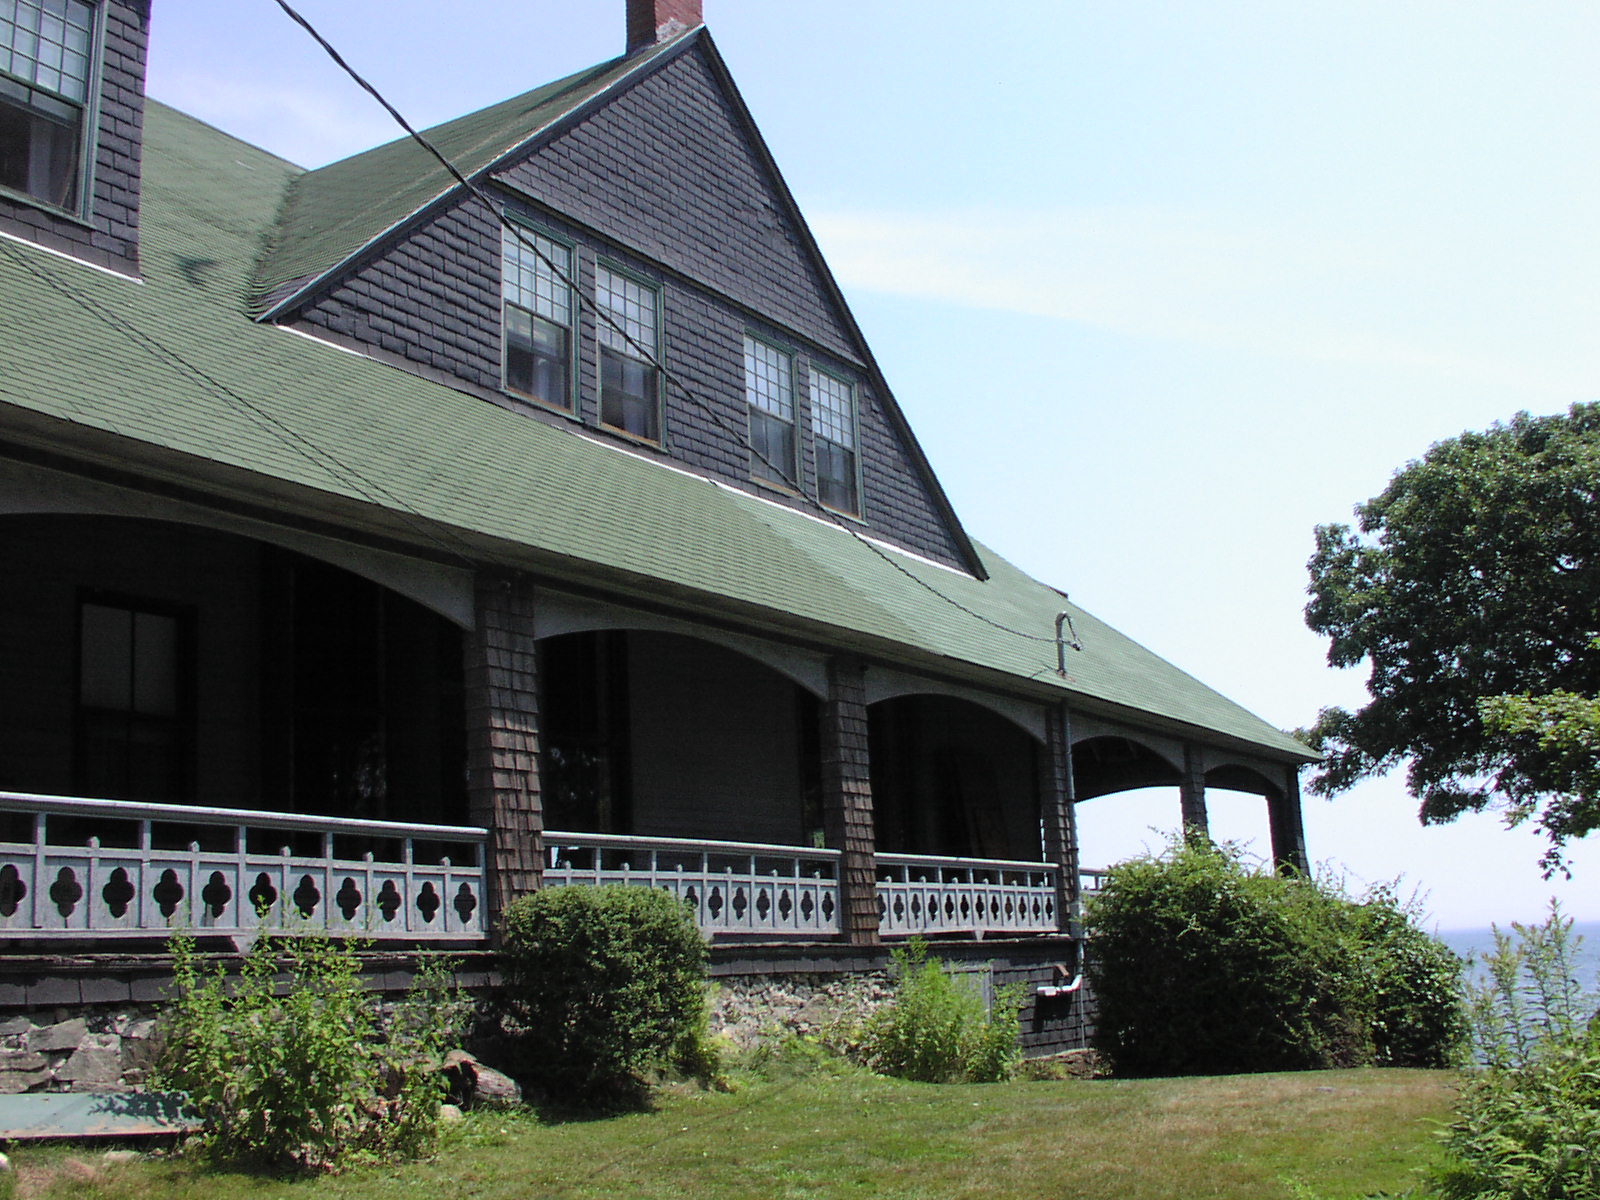 Eighth Maine Living Museum and Lodge, budget-friendly guest house on Peaks Island, off Portland, Maine